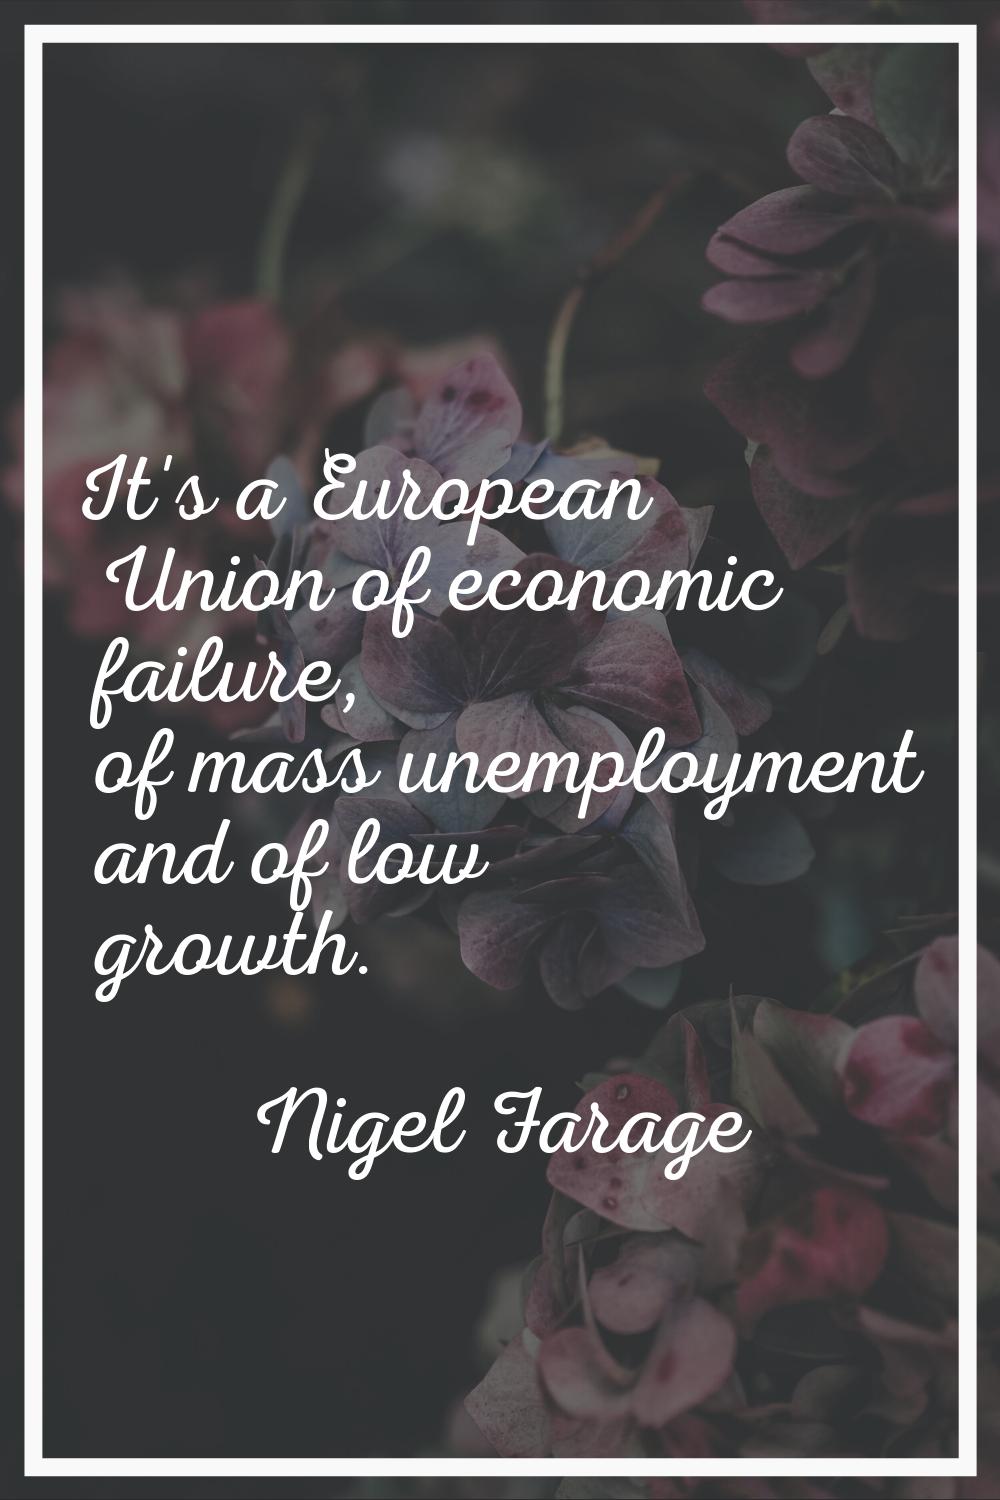 It's a European Union of economic failure, of mass unemployment and of low growth.